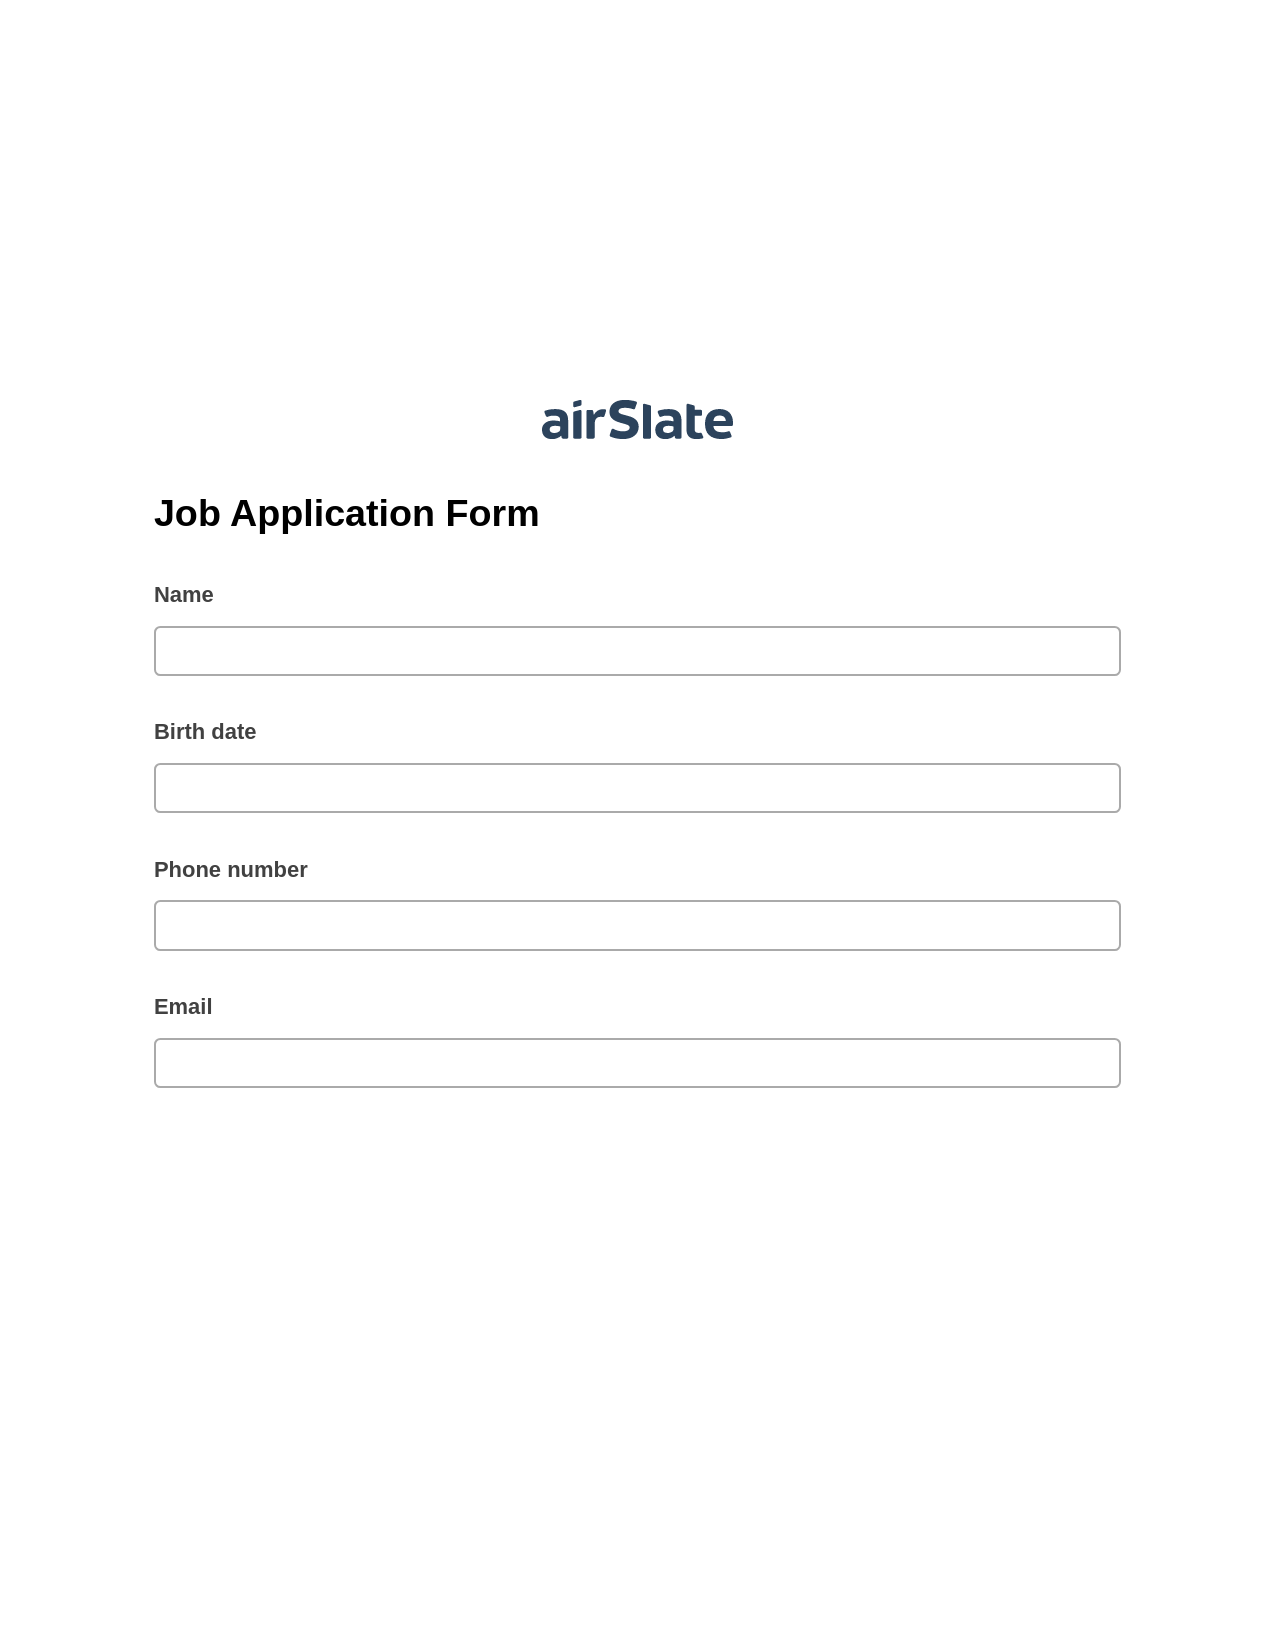 Multirole Job Application Form Pre-fill from Google Sheets Bot, Document Hide Bot, Export to NetSuite Record Bot